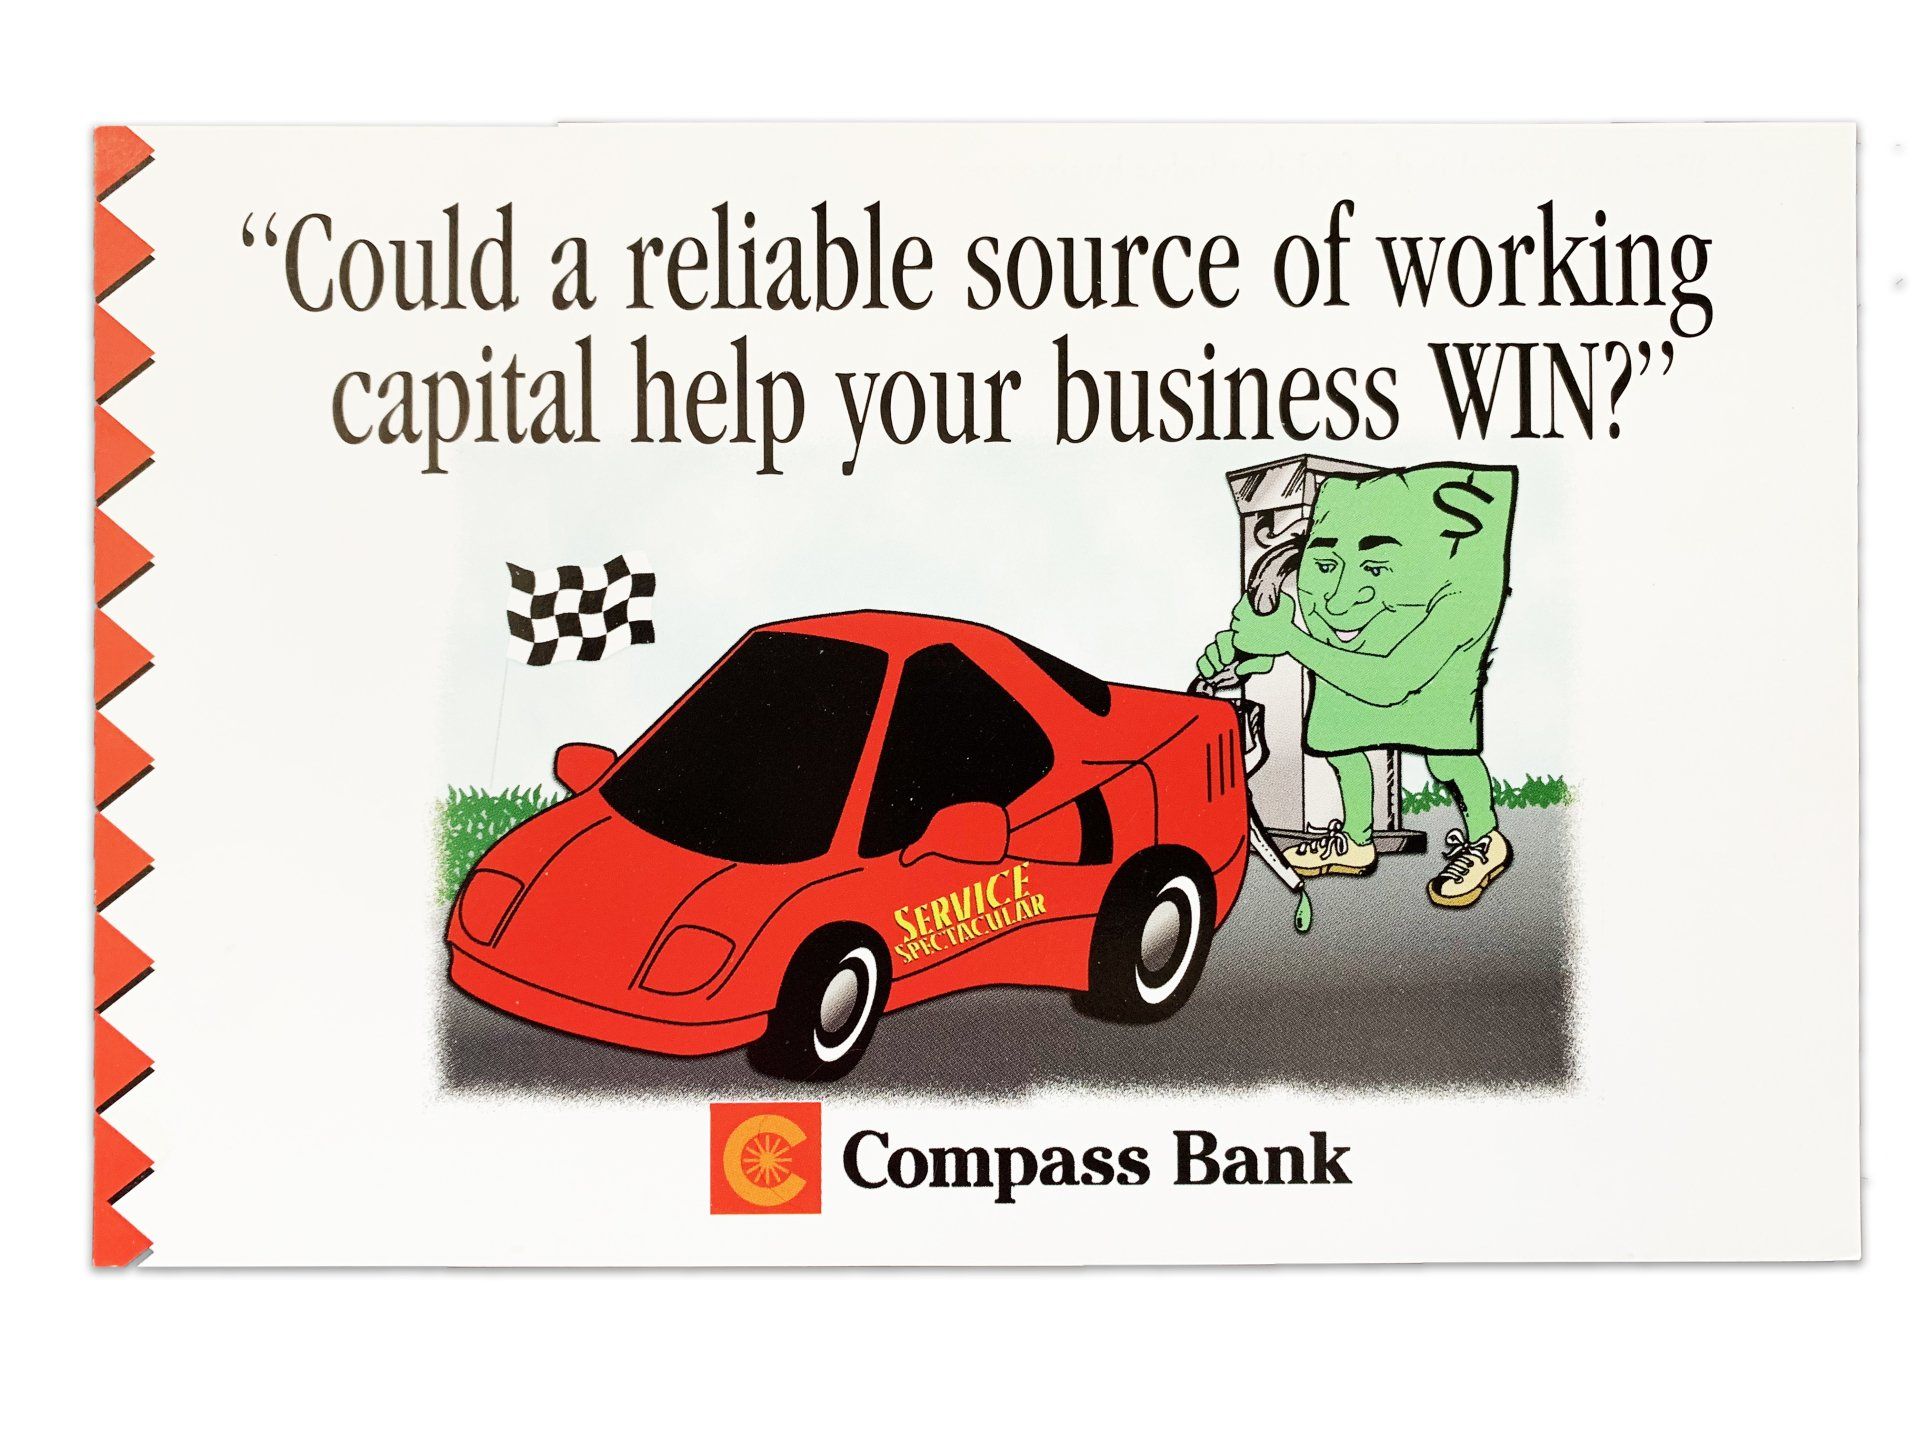 An advertisement for compass bank with a red car